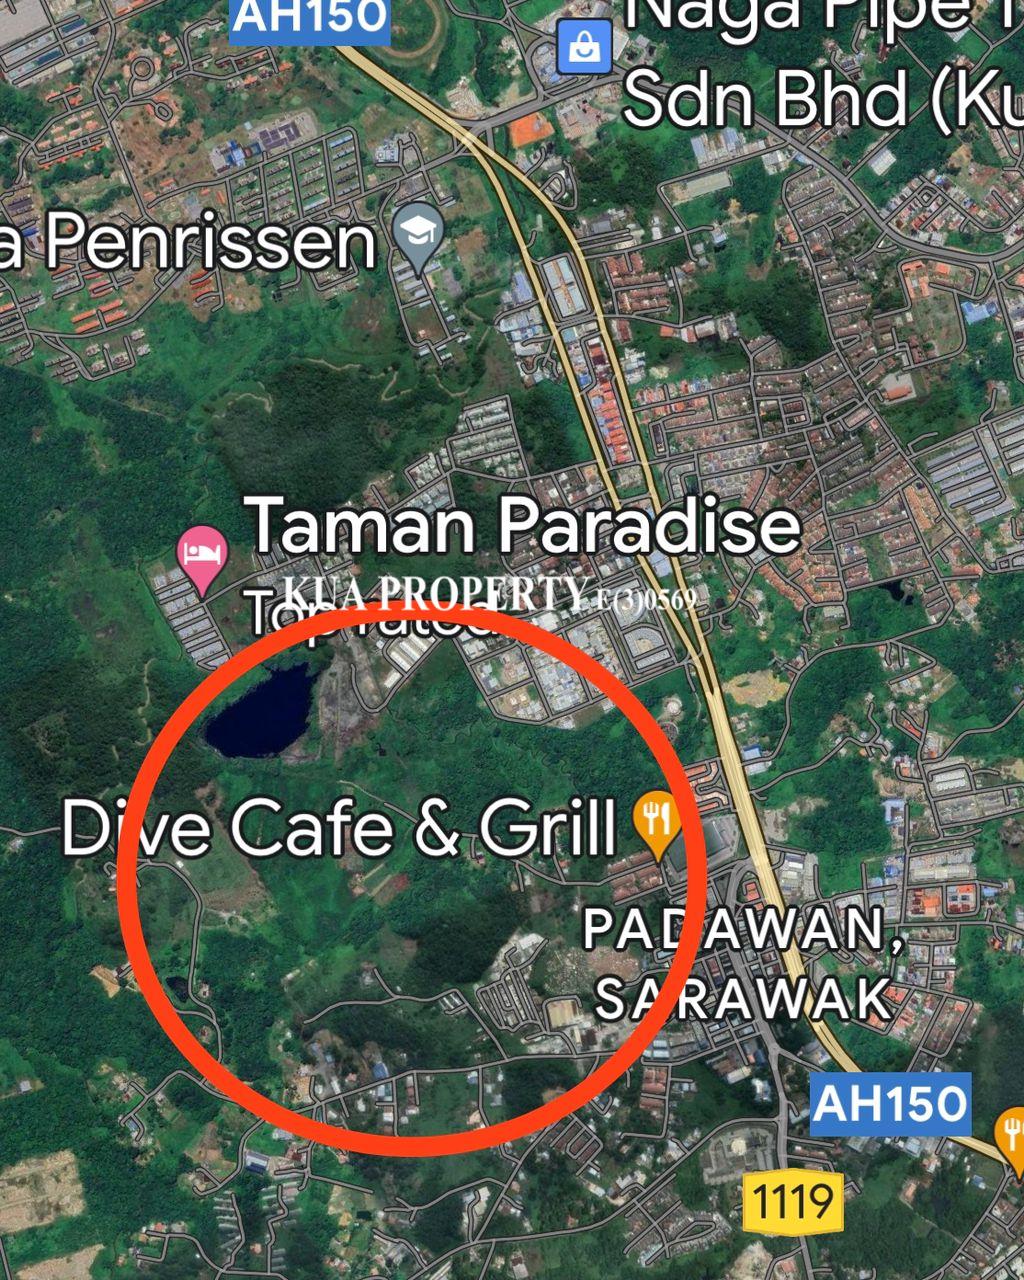 Land For Sale! Located at 10th Mile, Penrissen Road Kuching